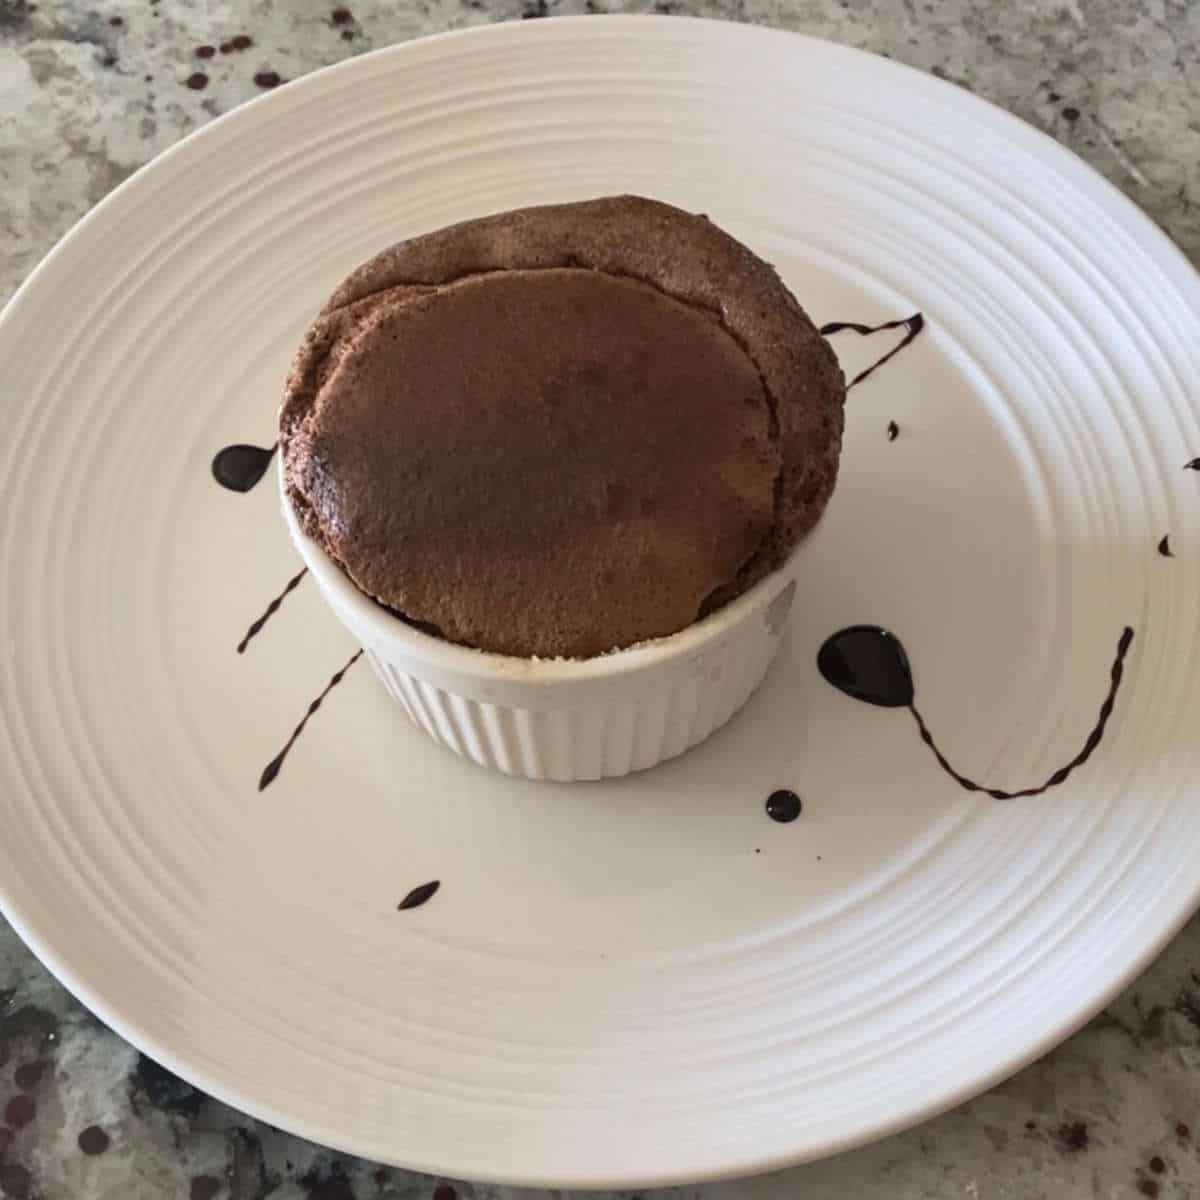 Baked molten chocolate souffle